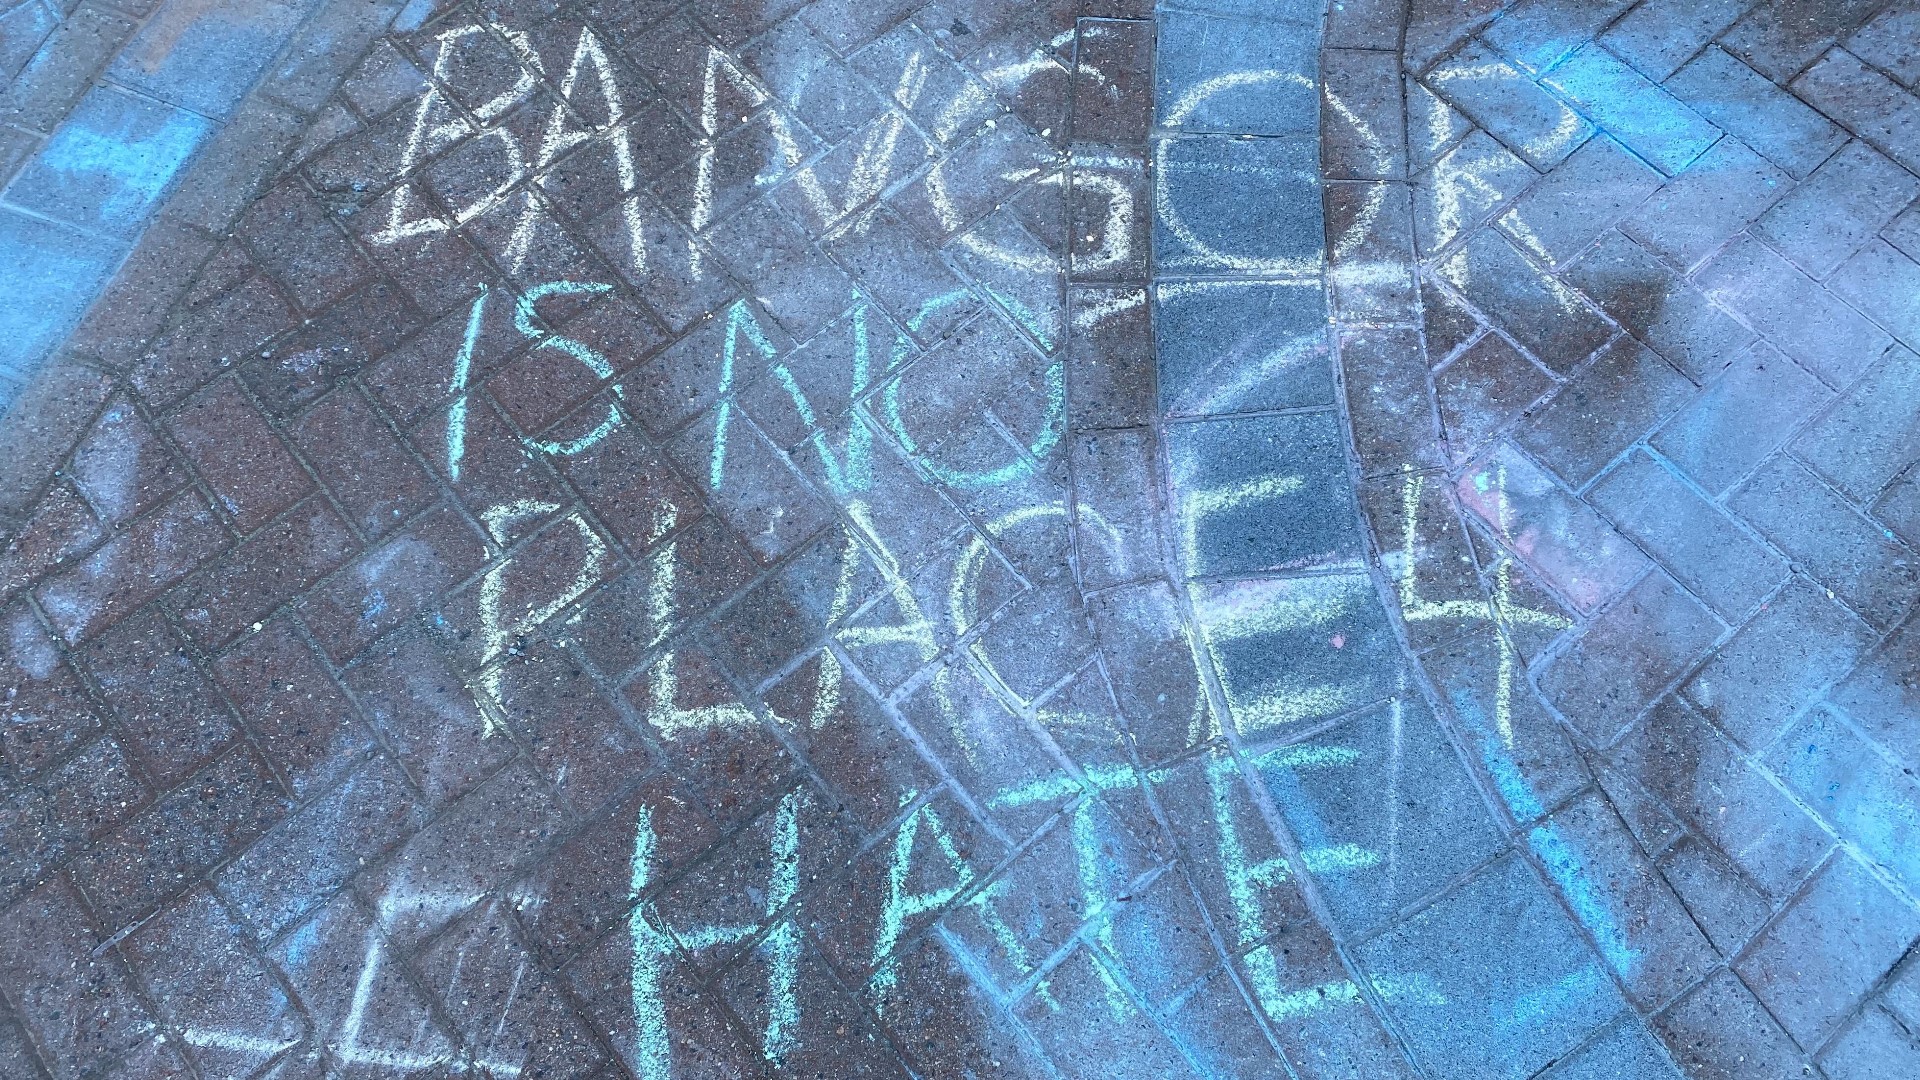 An incident over the weekend is leaving Bangor residents in a debate over free speech.